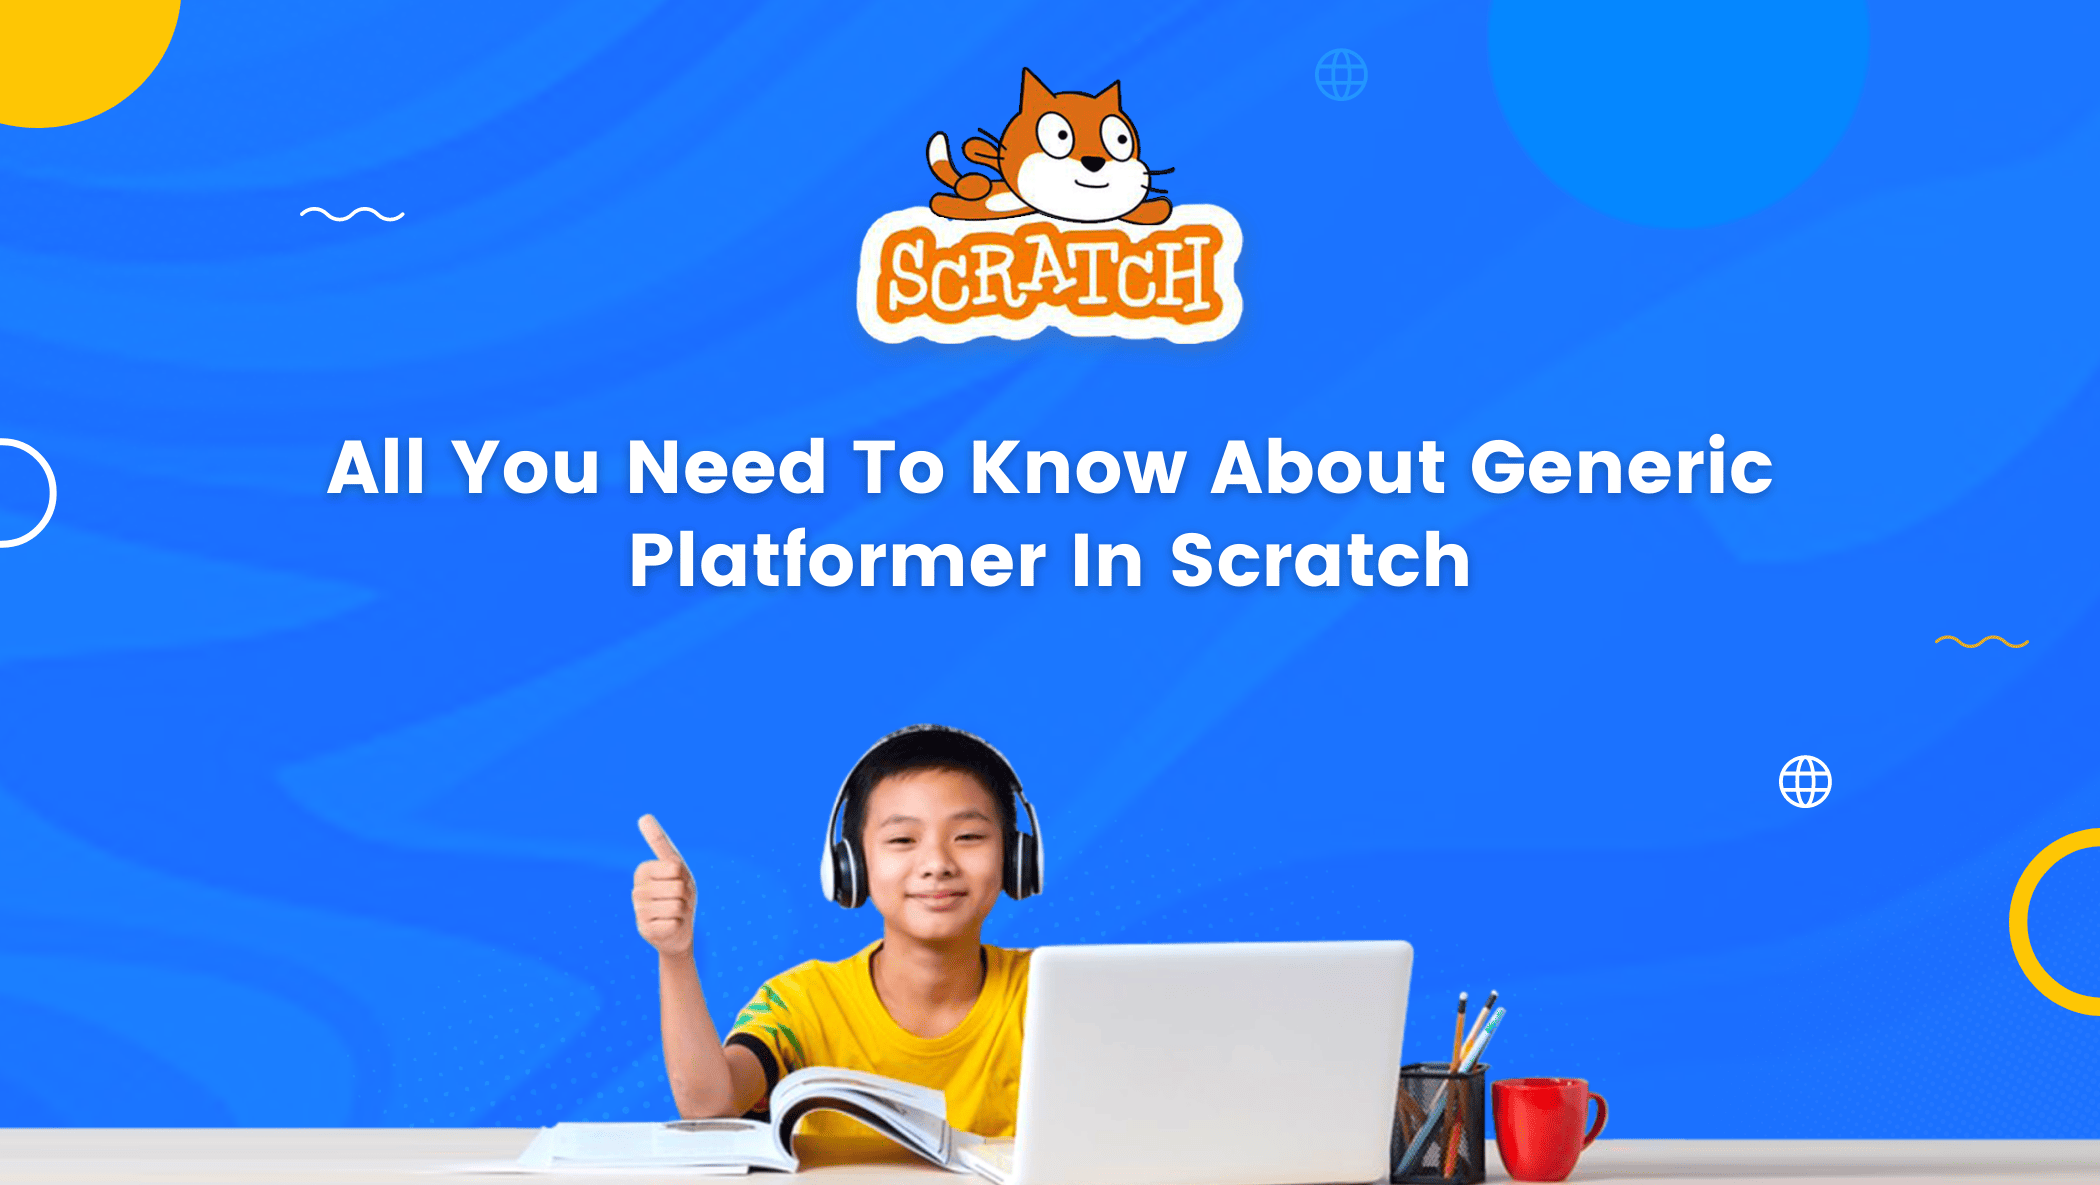 All You Need To Know About Generic Platformer In Scratch